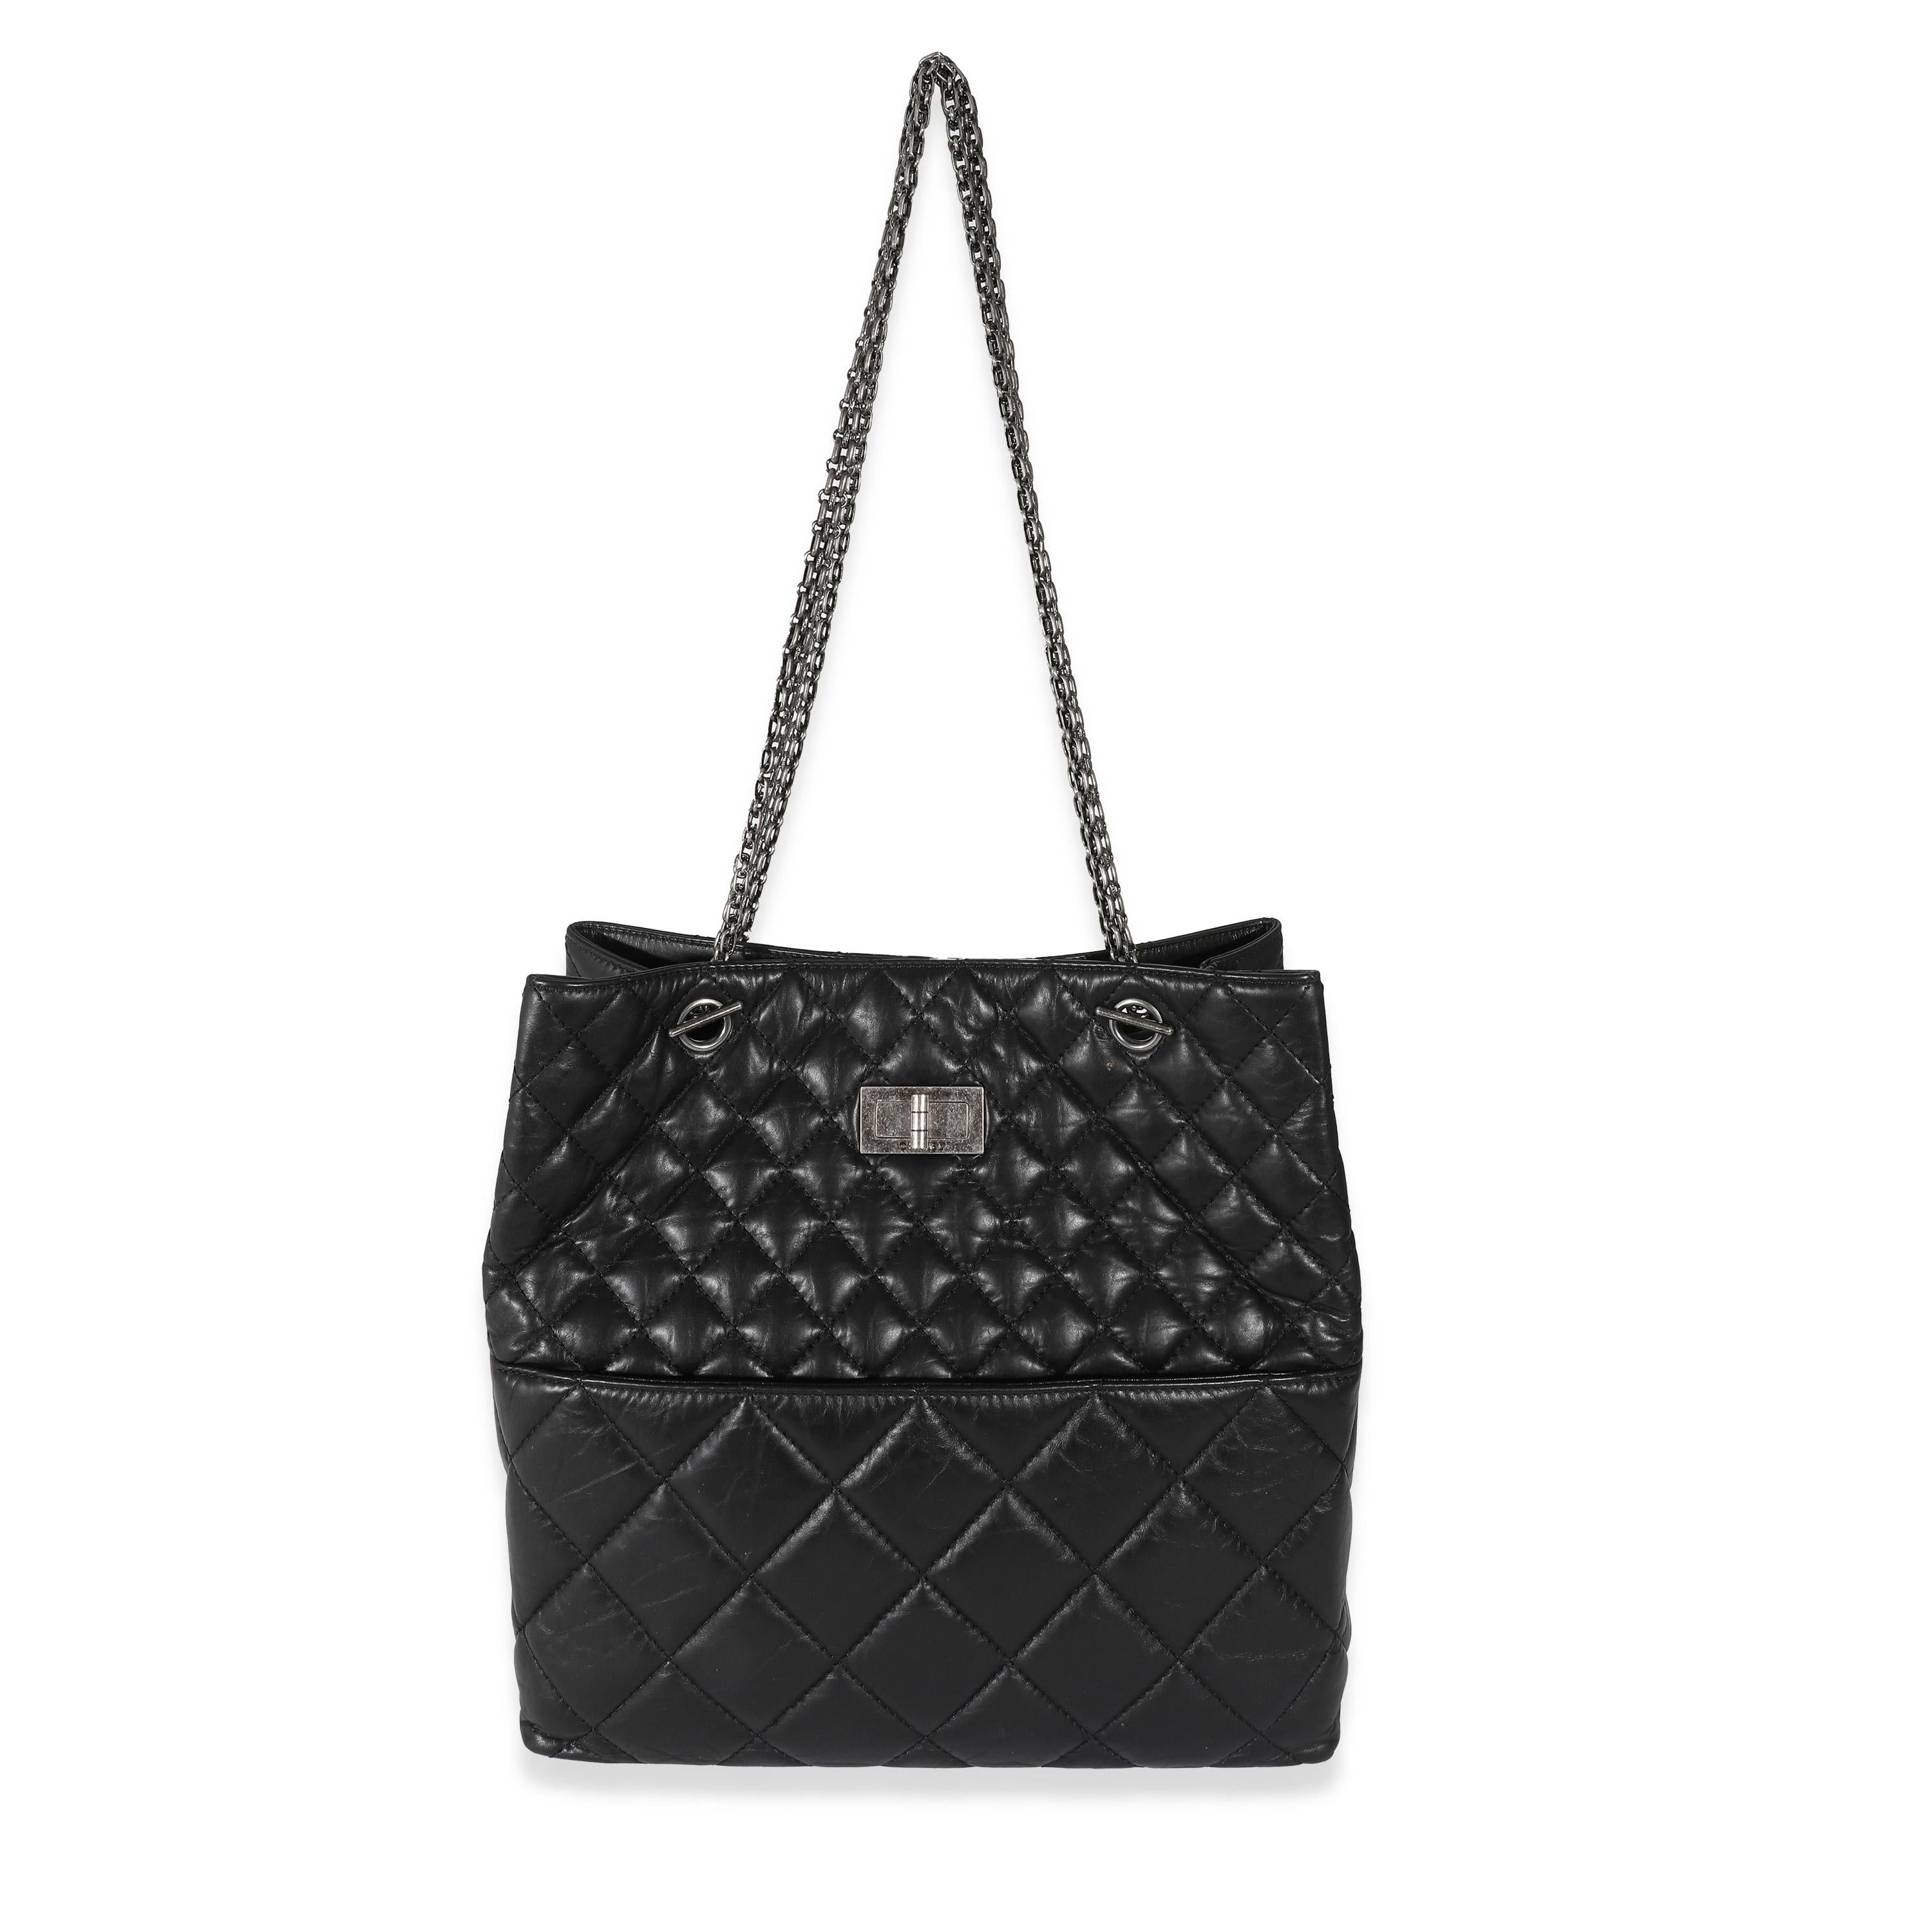 Listing Title: Chanel Black Calfskin Tall 2.55 Reissue Tote
SKU: 132526
Condition: Pre-owned 
Handbag Condition: Very Good
Condition Comments: Item is in very good condition with minor signs of wear.  Exterior scuffing, marks and light indentation.